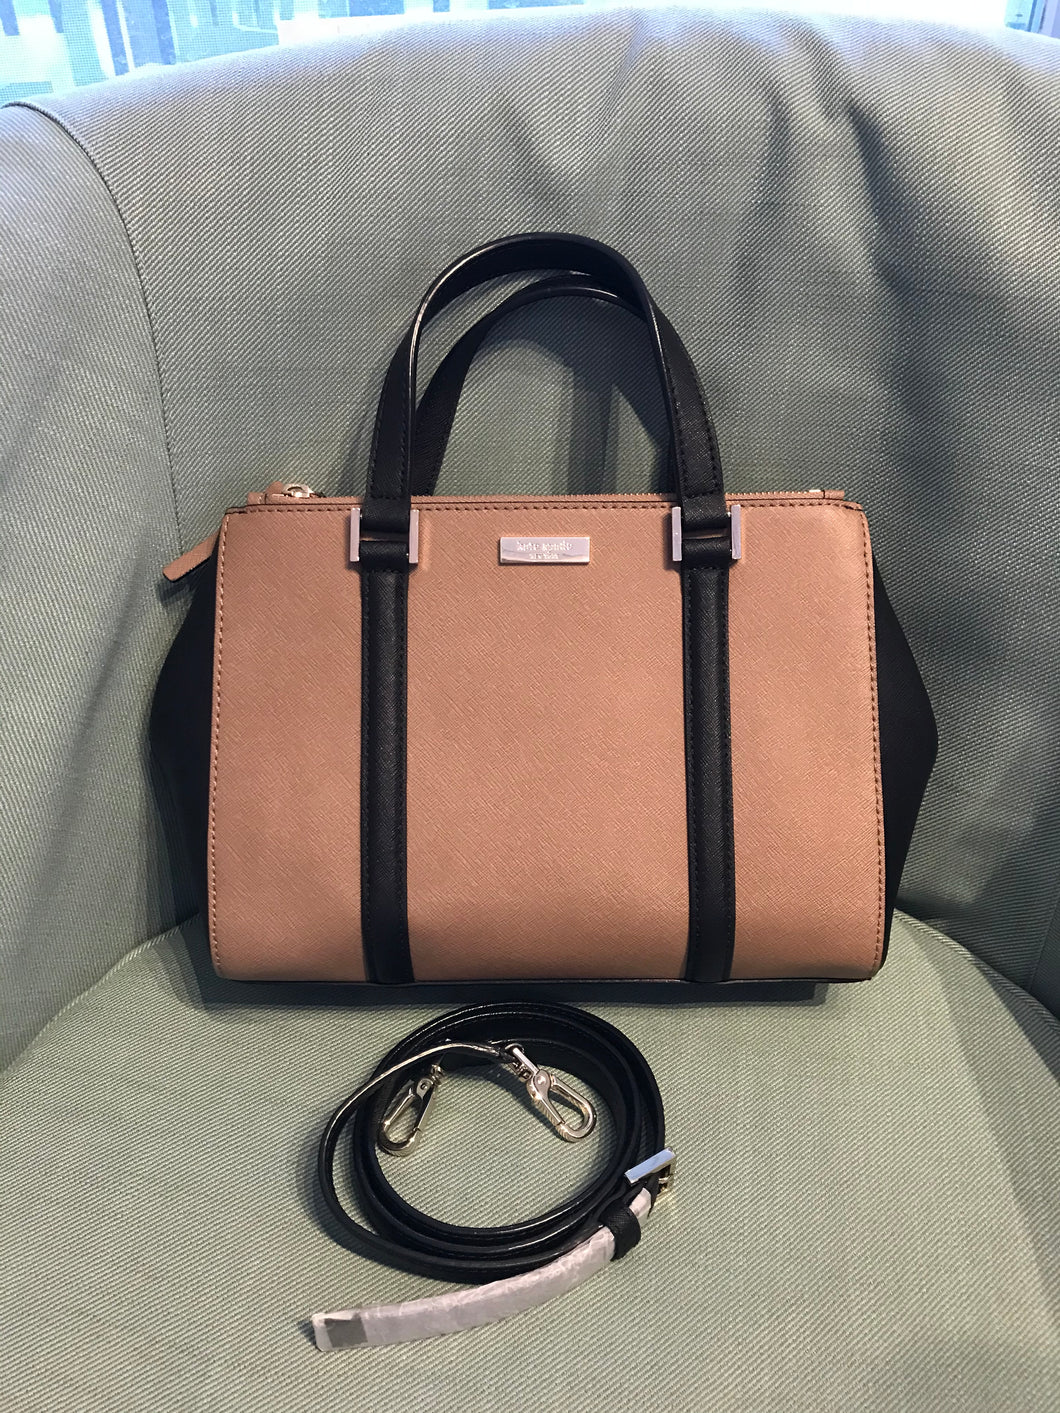 KATE SPADE Triple Compartment Leather Tote